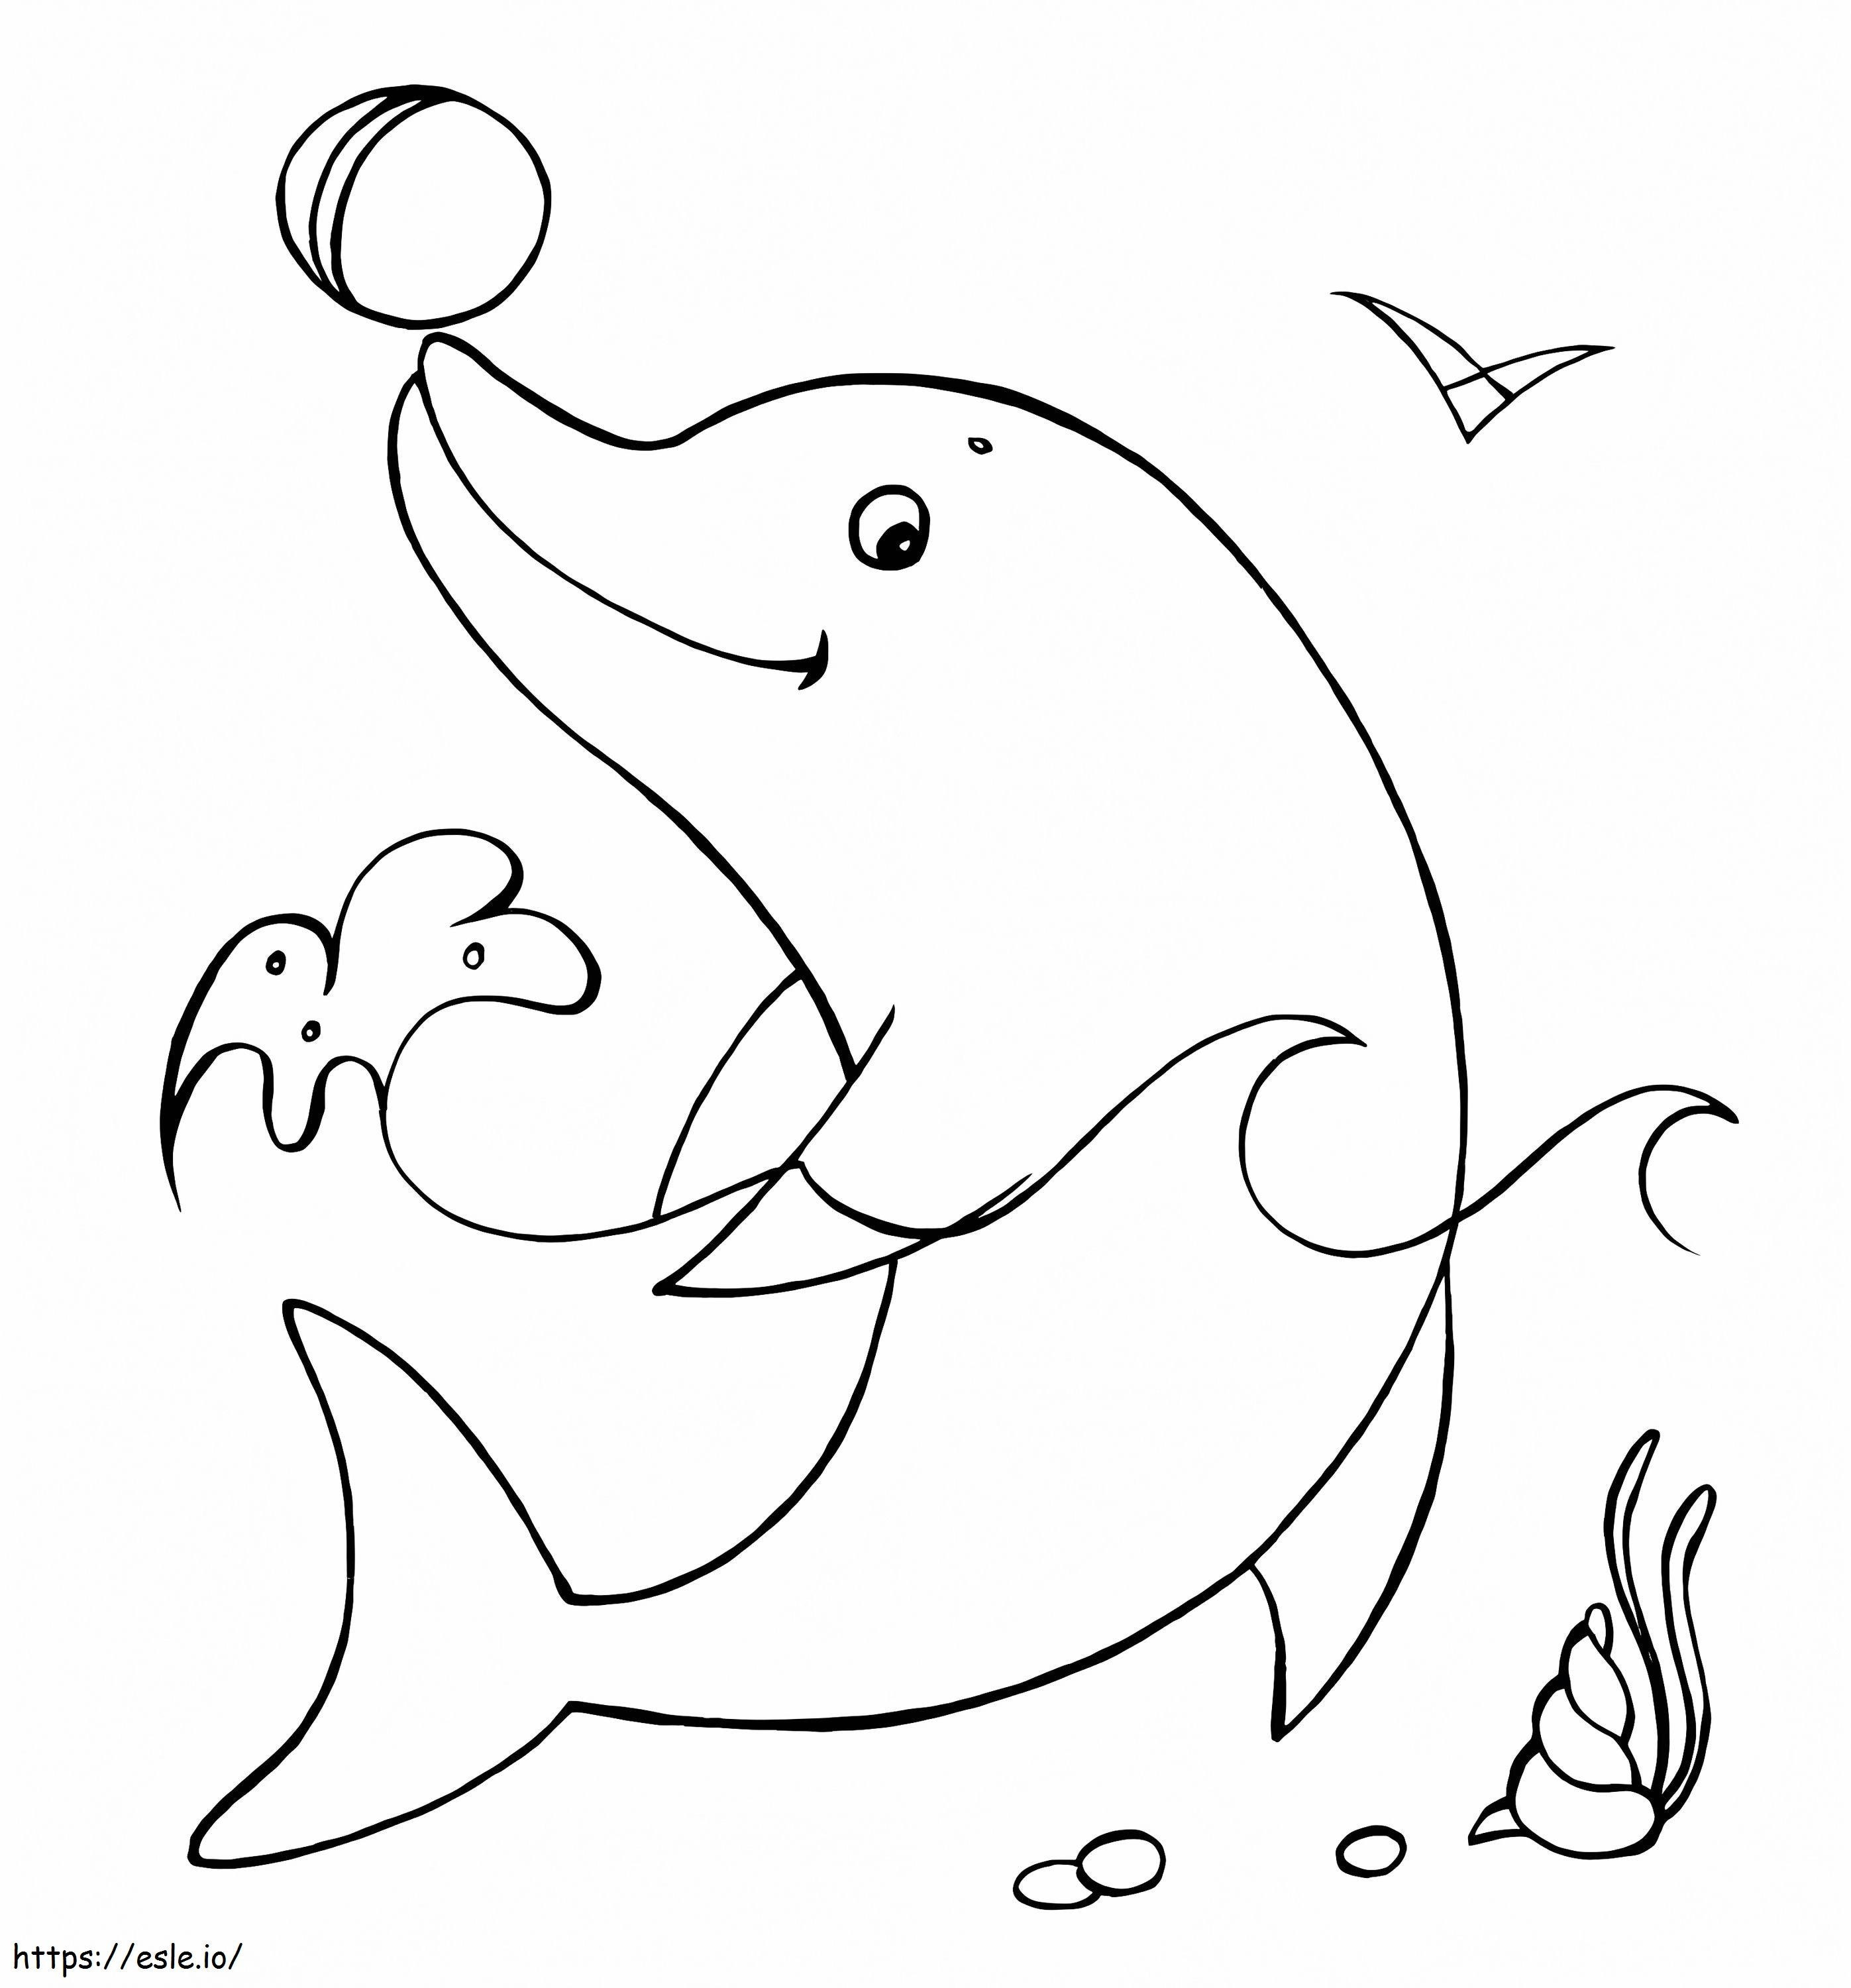 Dolphin With The Ball coloring page